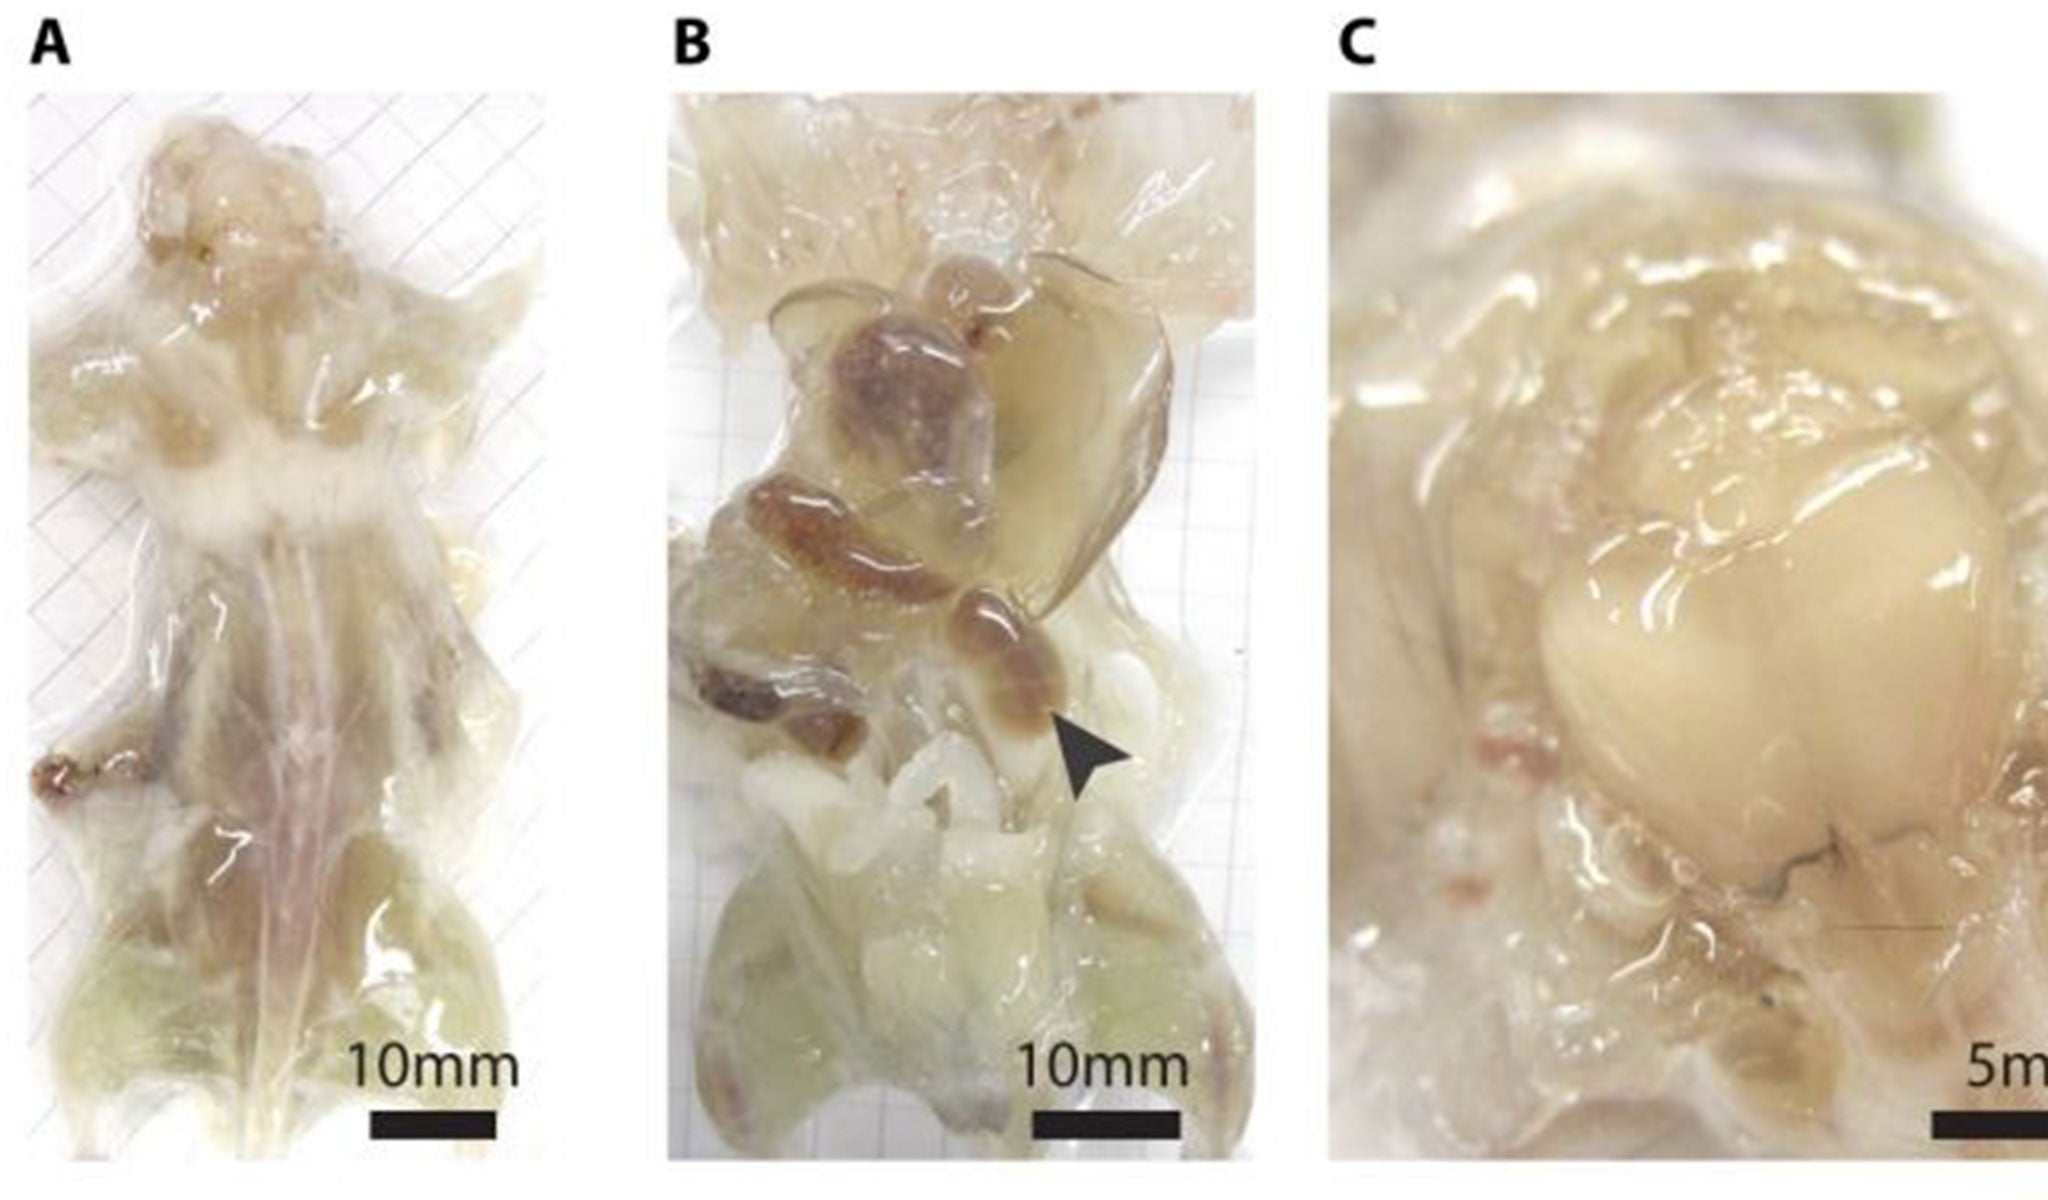 This undated photo combo provided by the journal Cell and taken with a bright field camera, shows a mouse with its skin removed during various stages of examination. In a study released by the journal Cell on Thursday, July 31, 2014, researchers describe